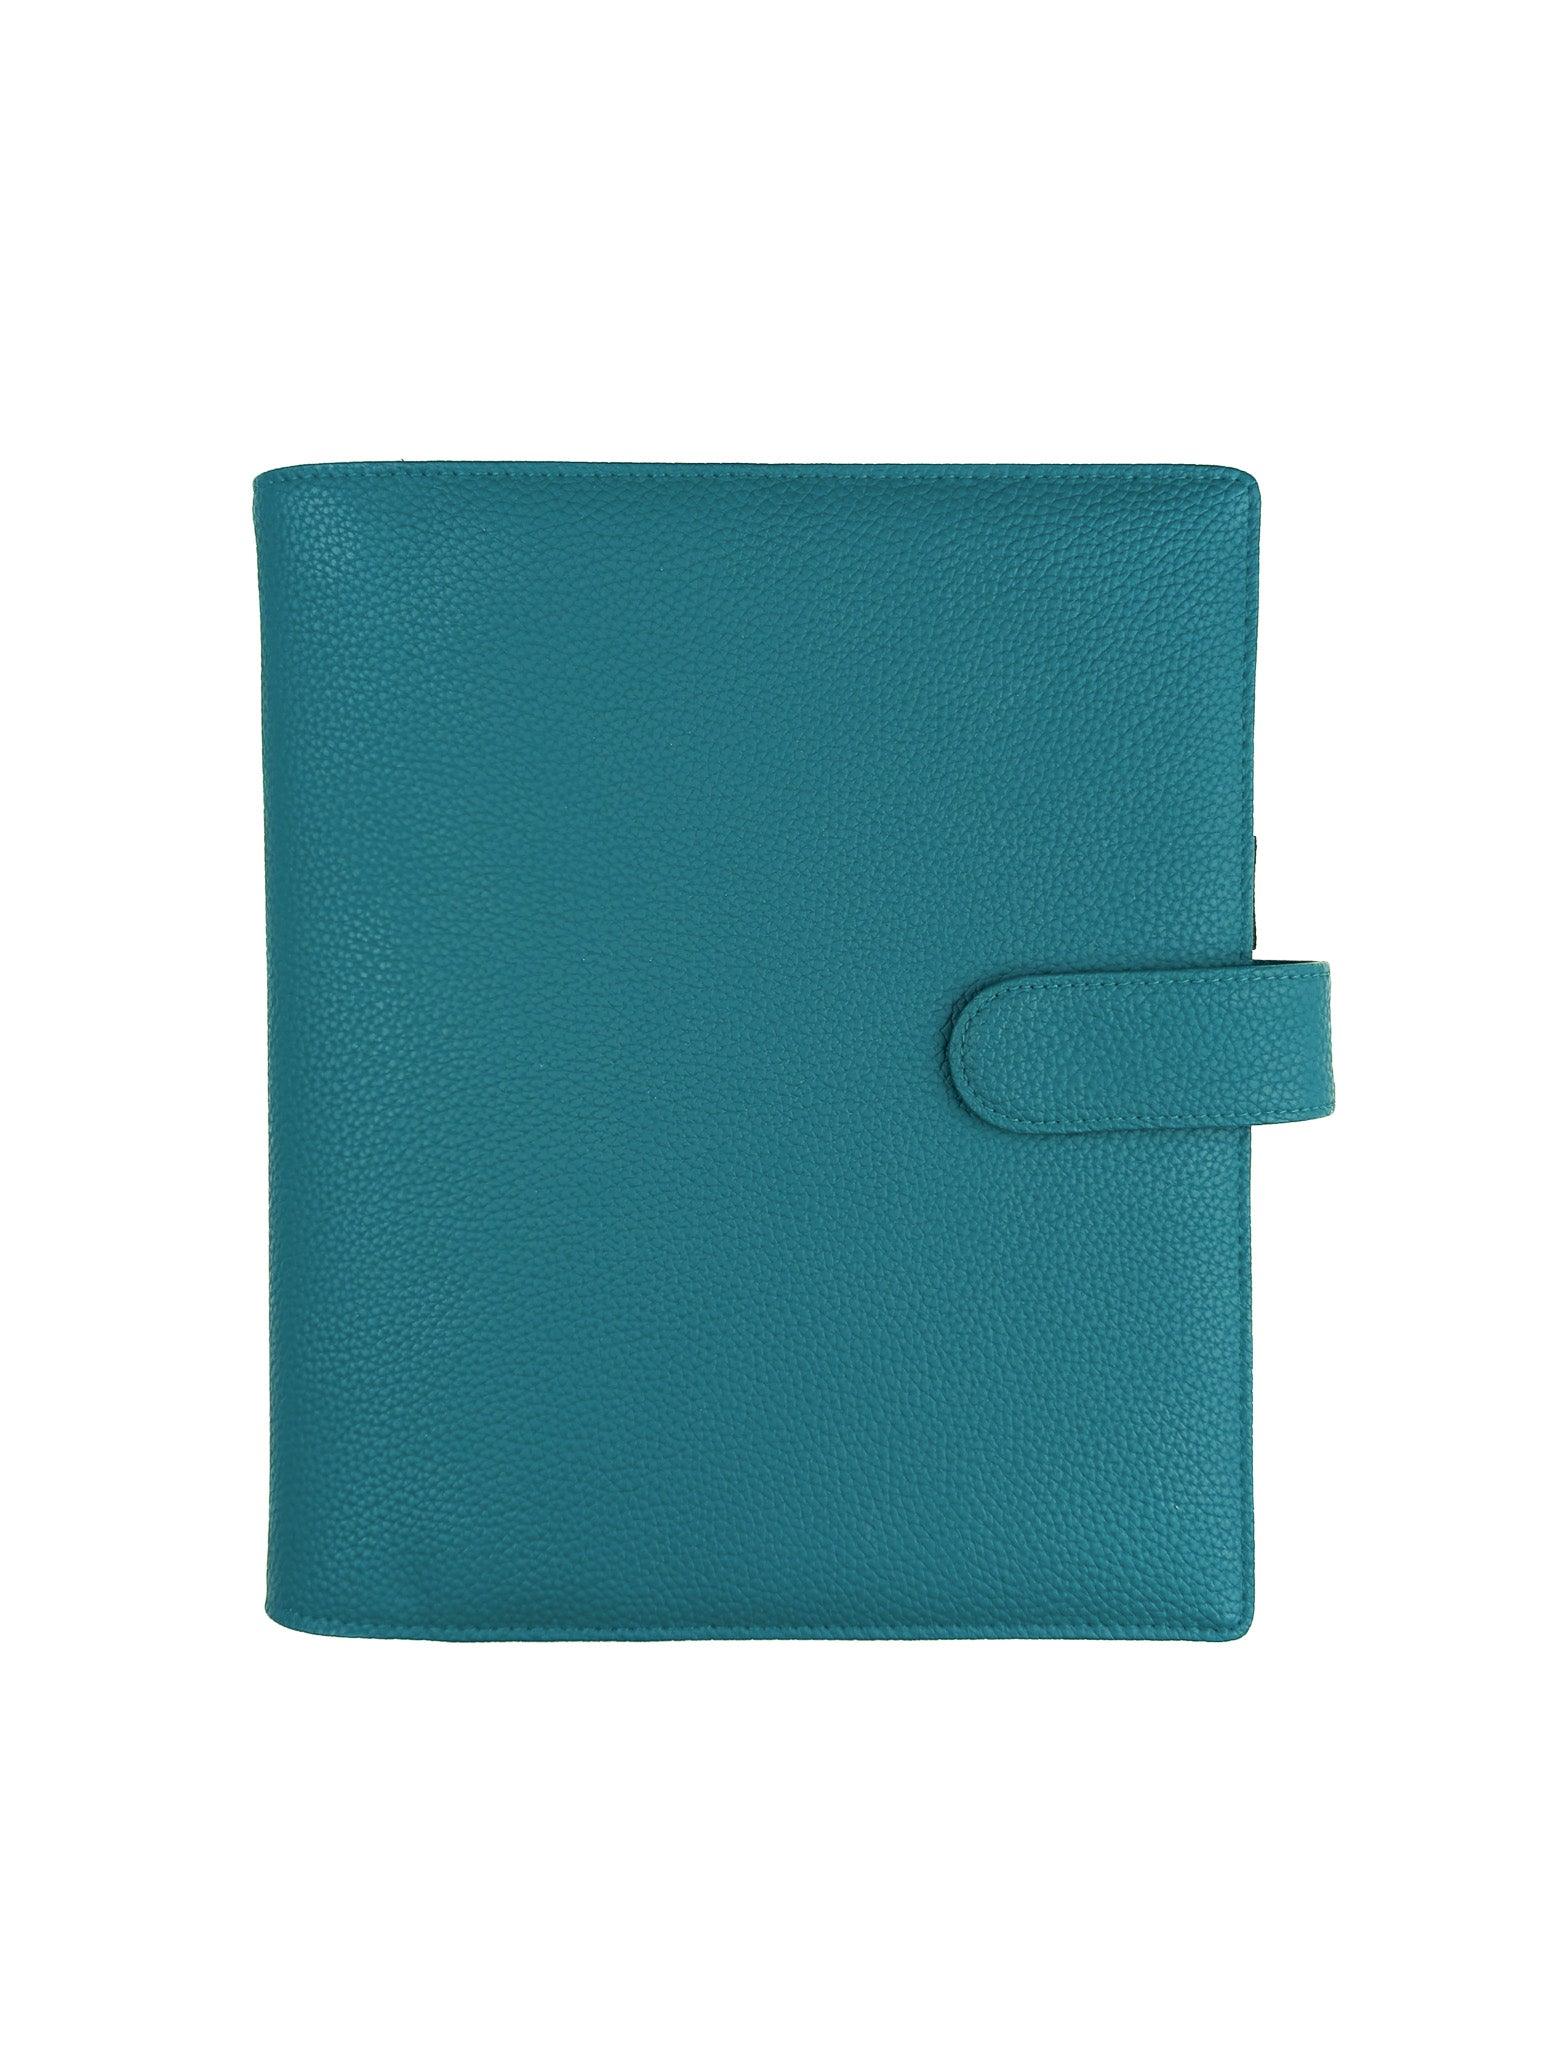 Teal Blue Vegan Leather Wrap Around Discbound Planner Cover for Discbound Planners and Disc Notebooks By Jane's Agenda.